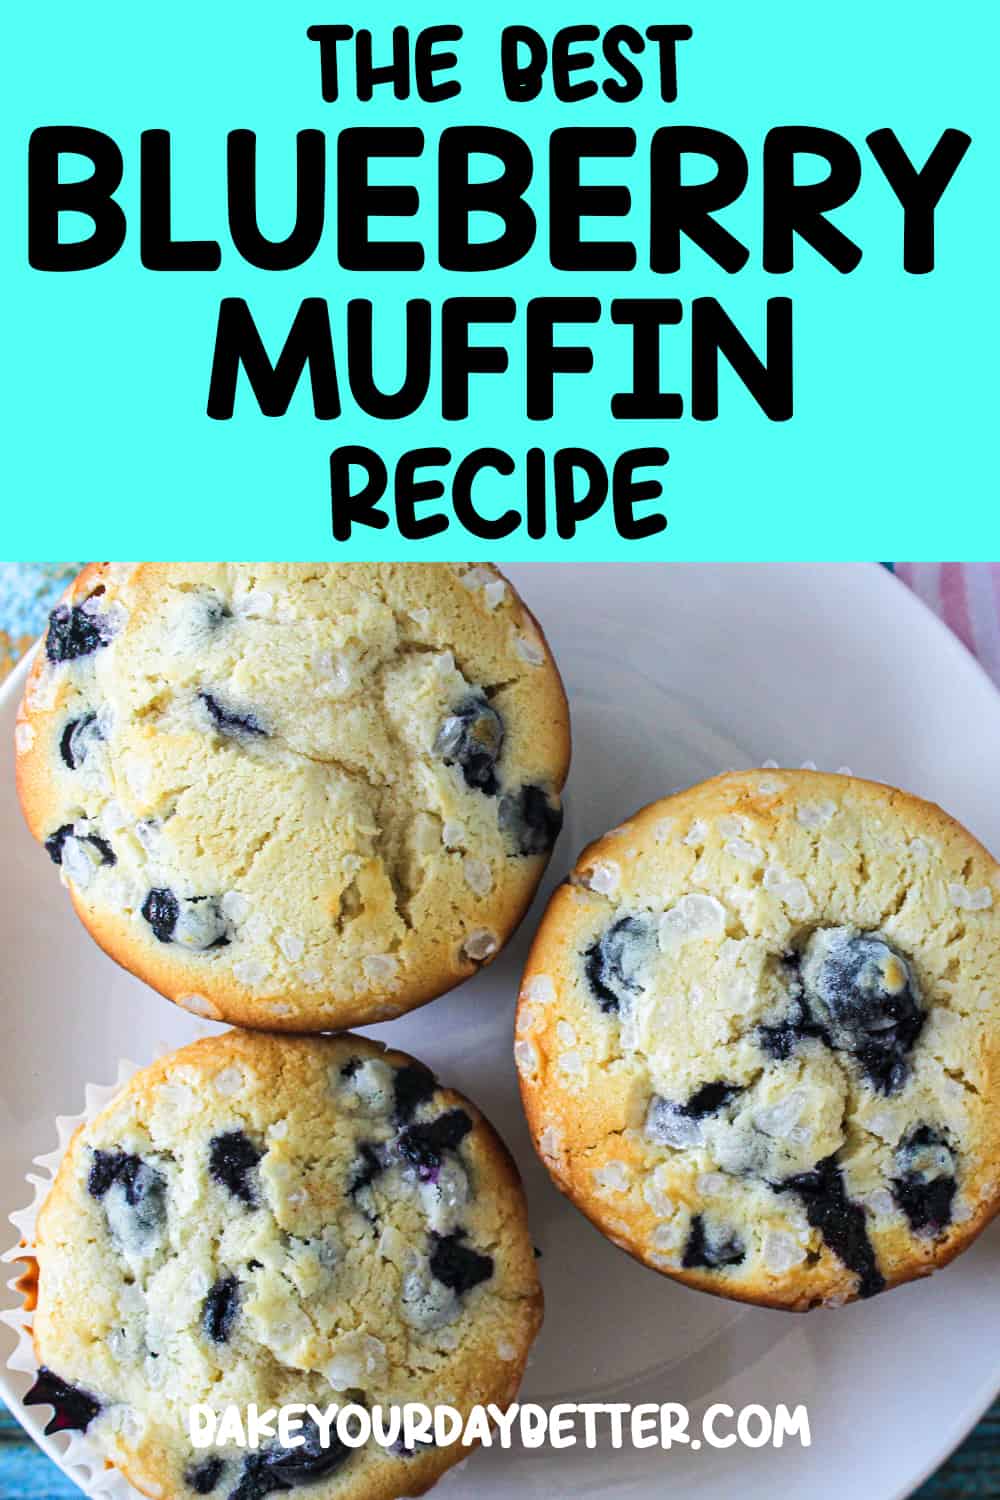 blueberry muffins with text overlay that says "the best blueberry muffin recipe"